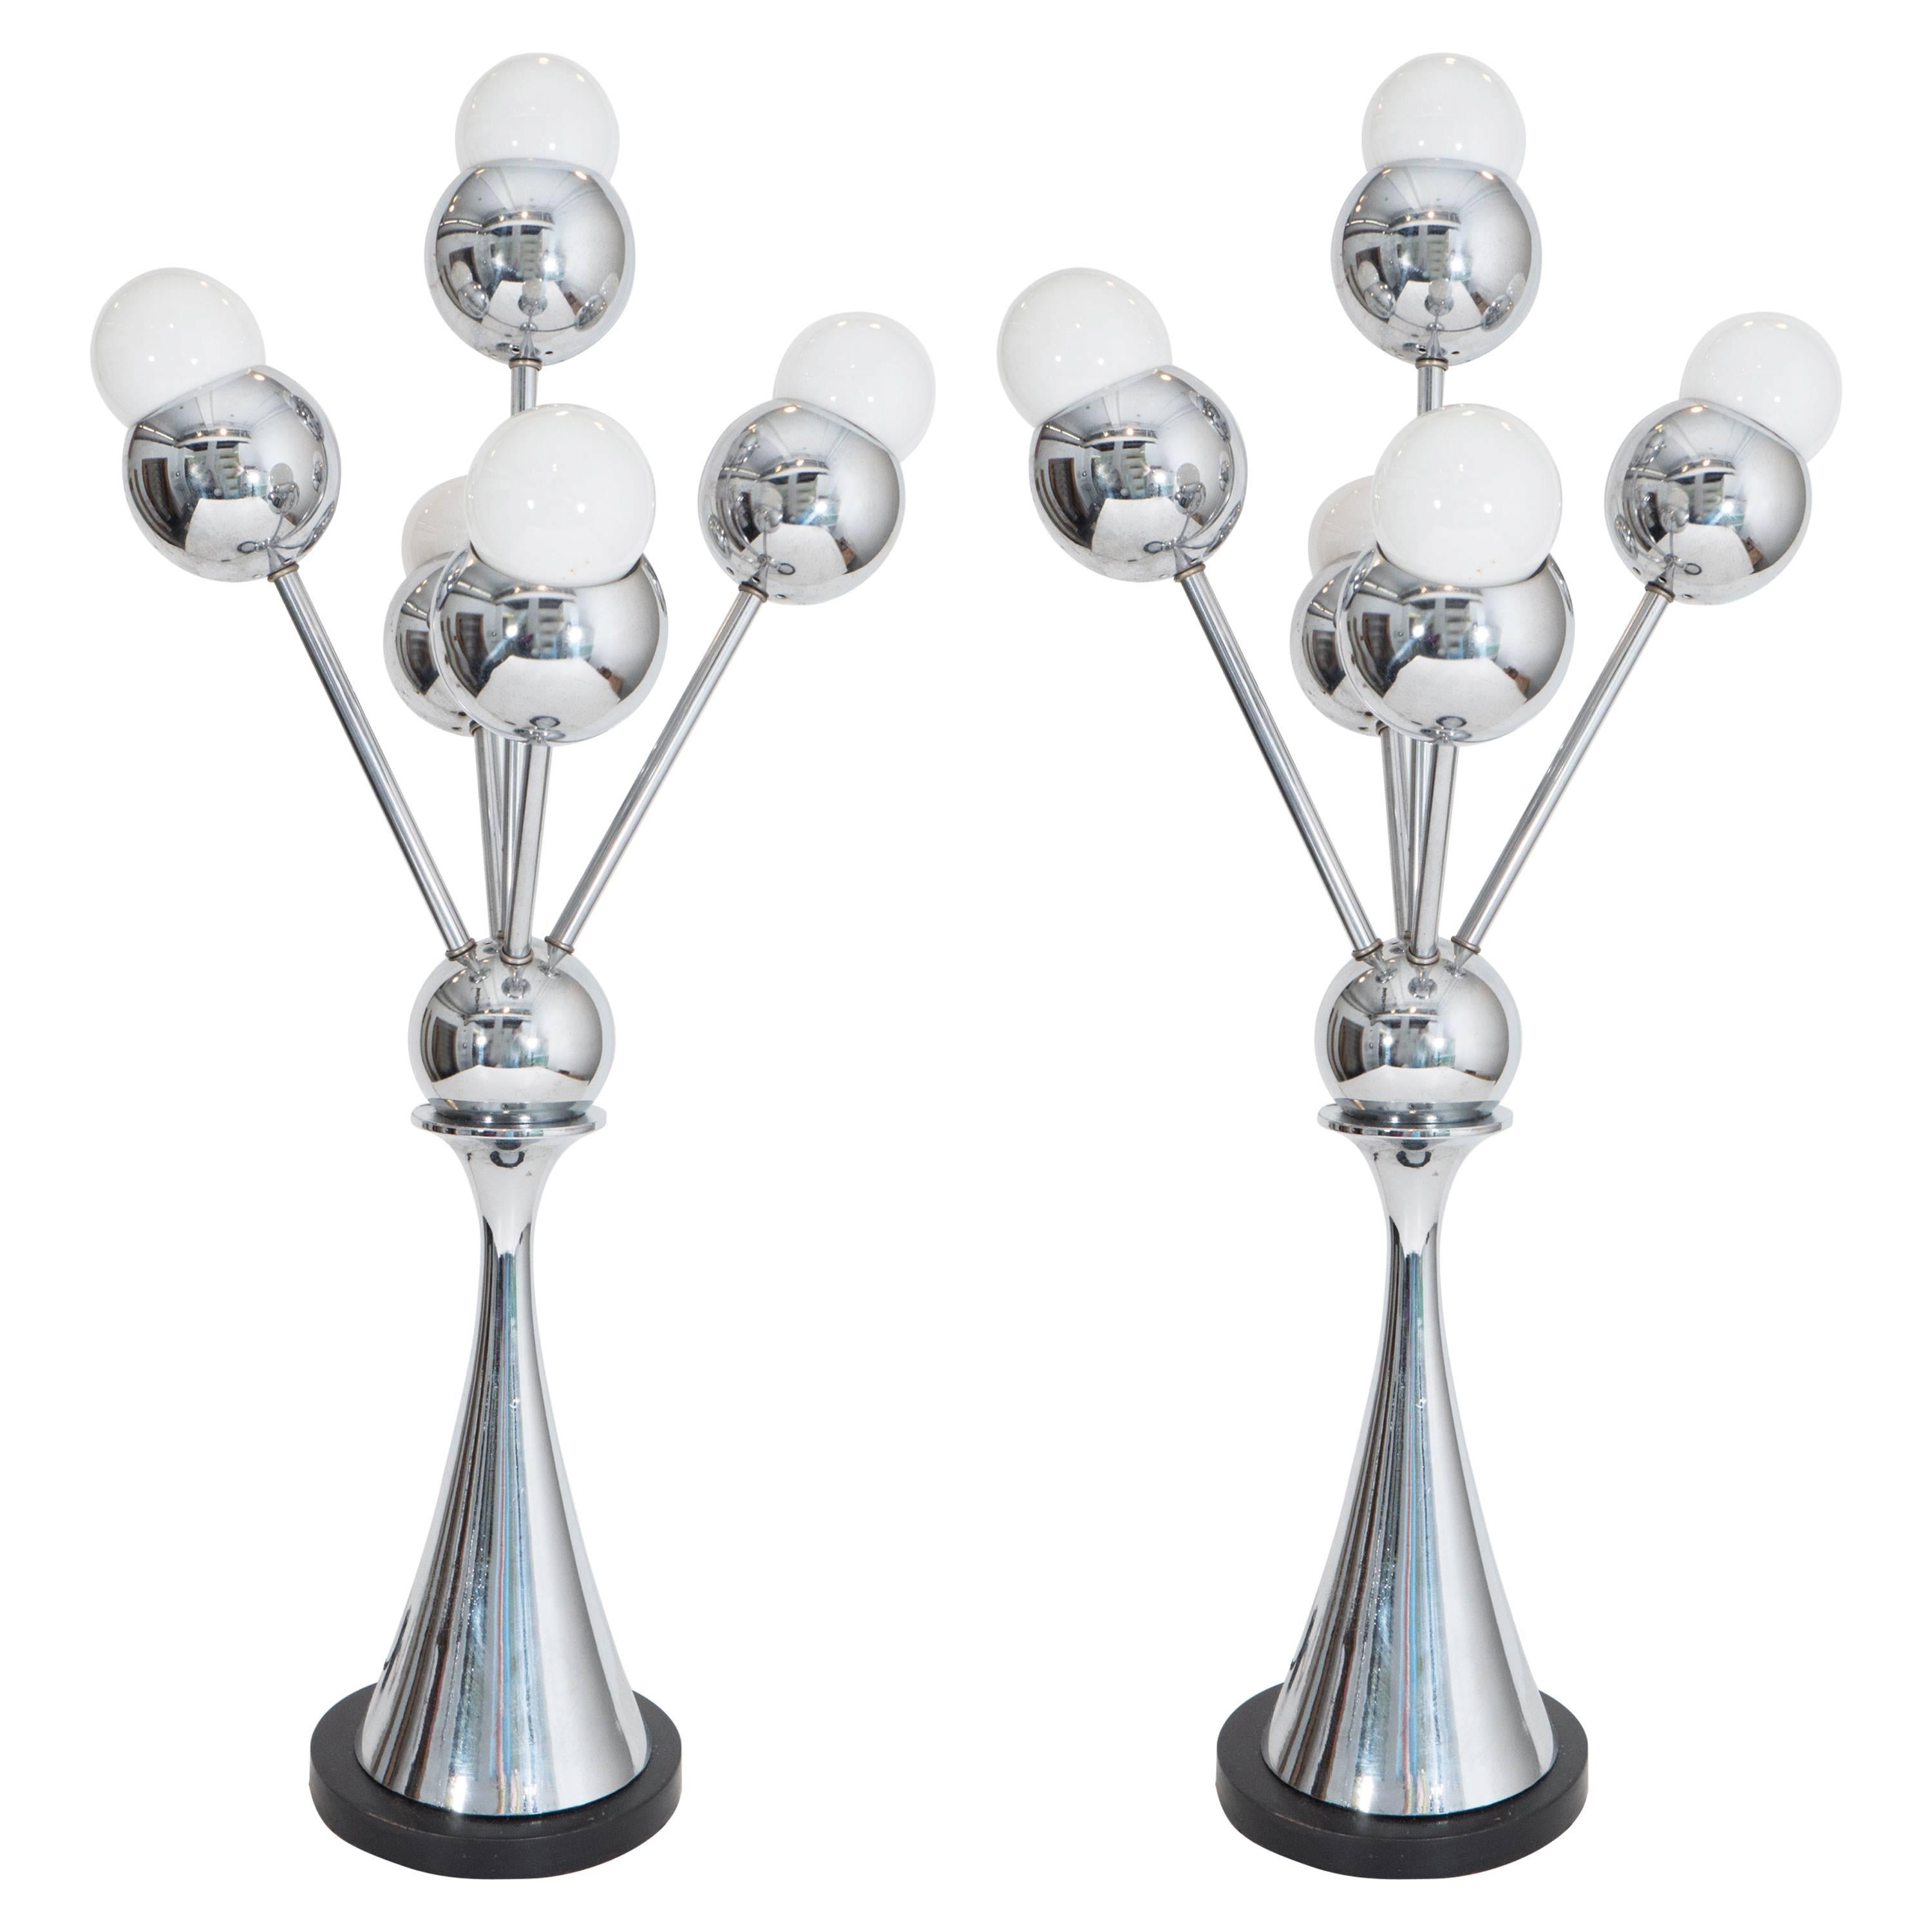 Pair of Space Age 1970s Chrome Table Lamps with Five Radiating Lights